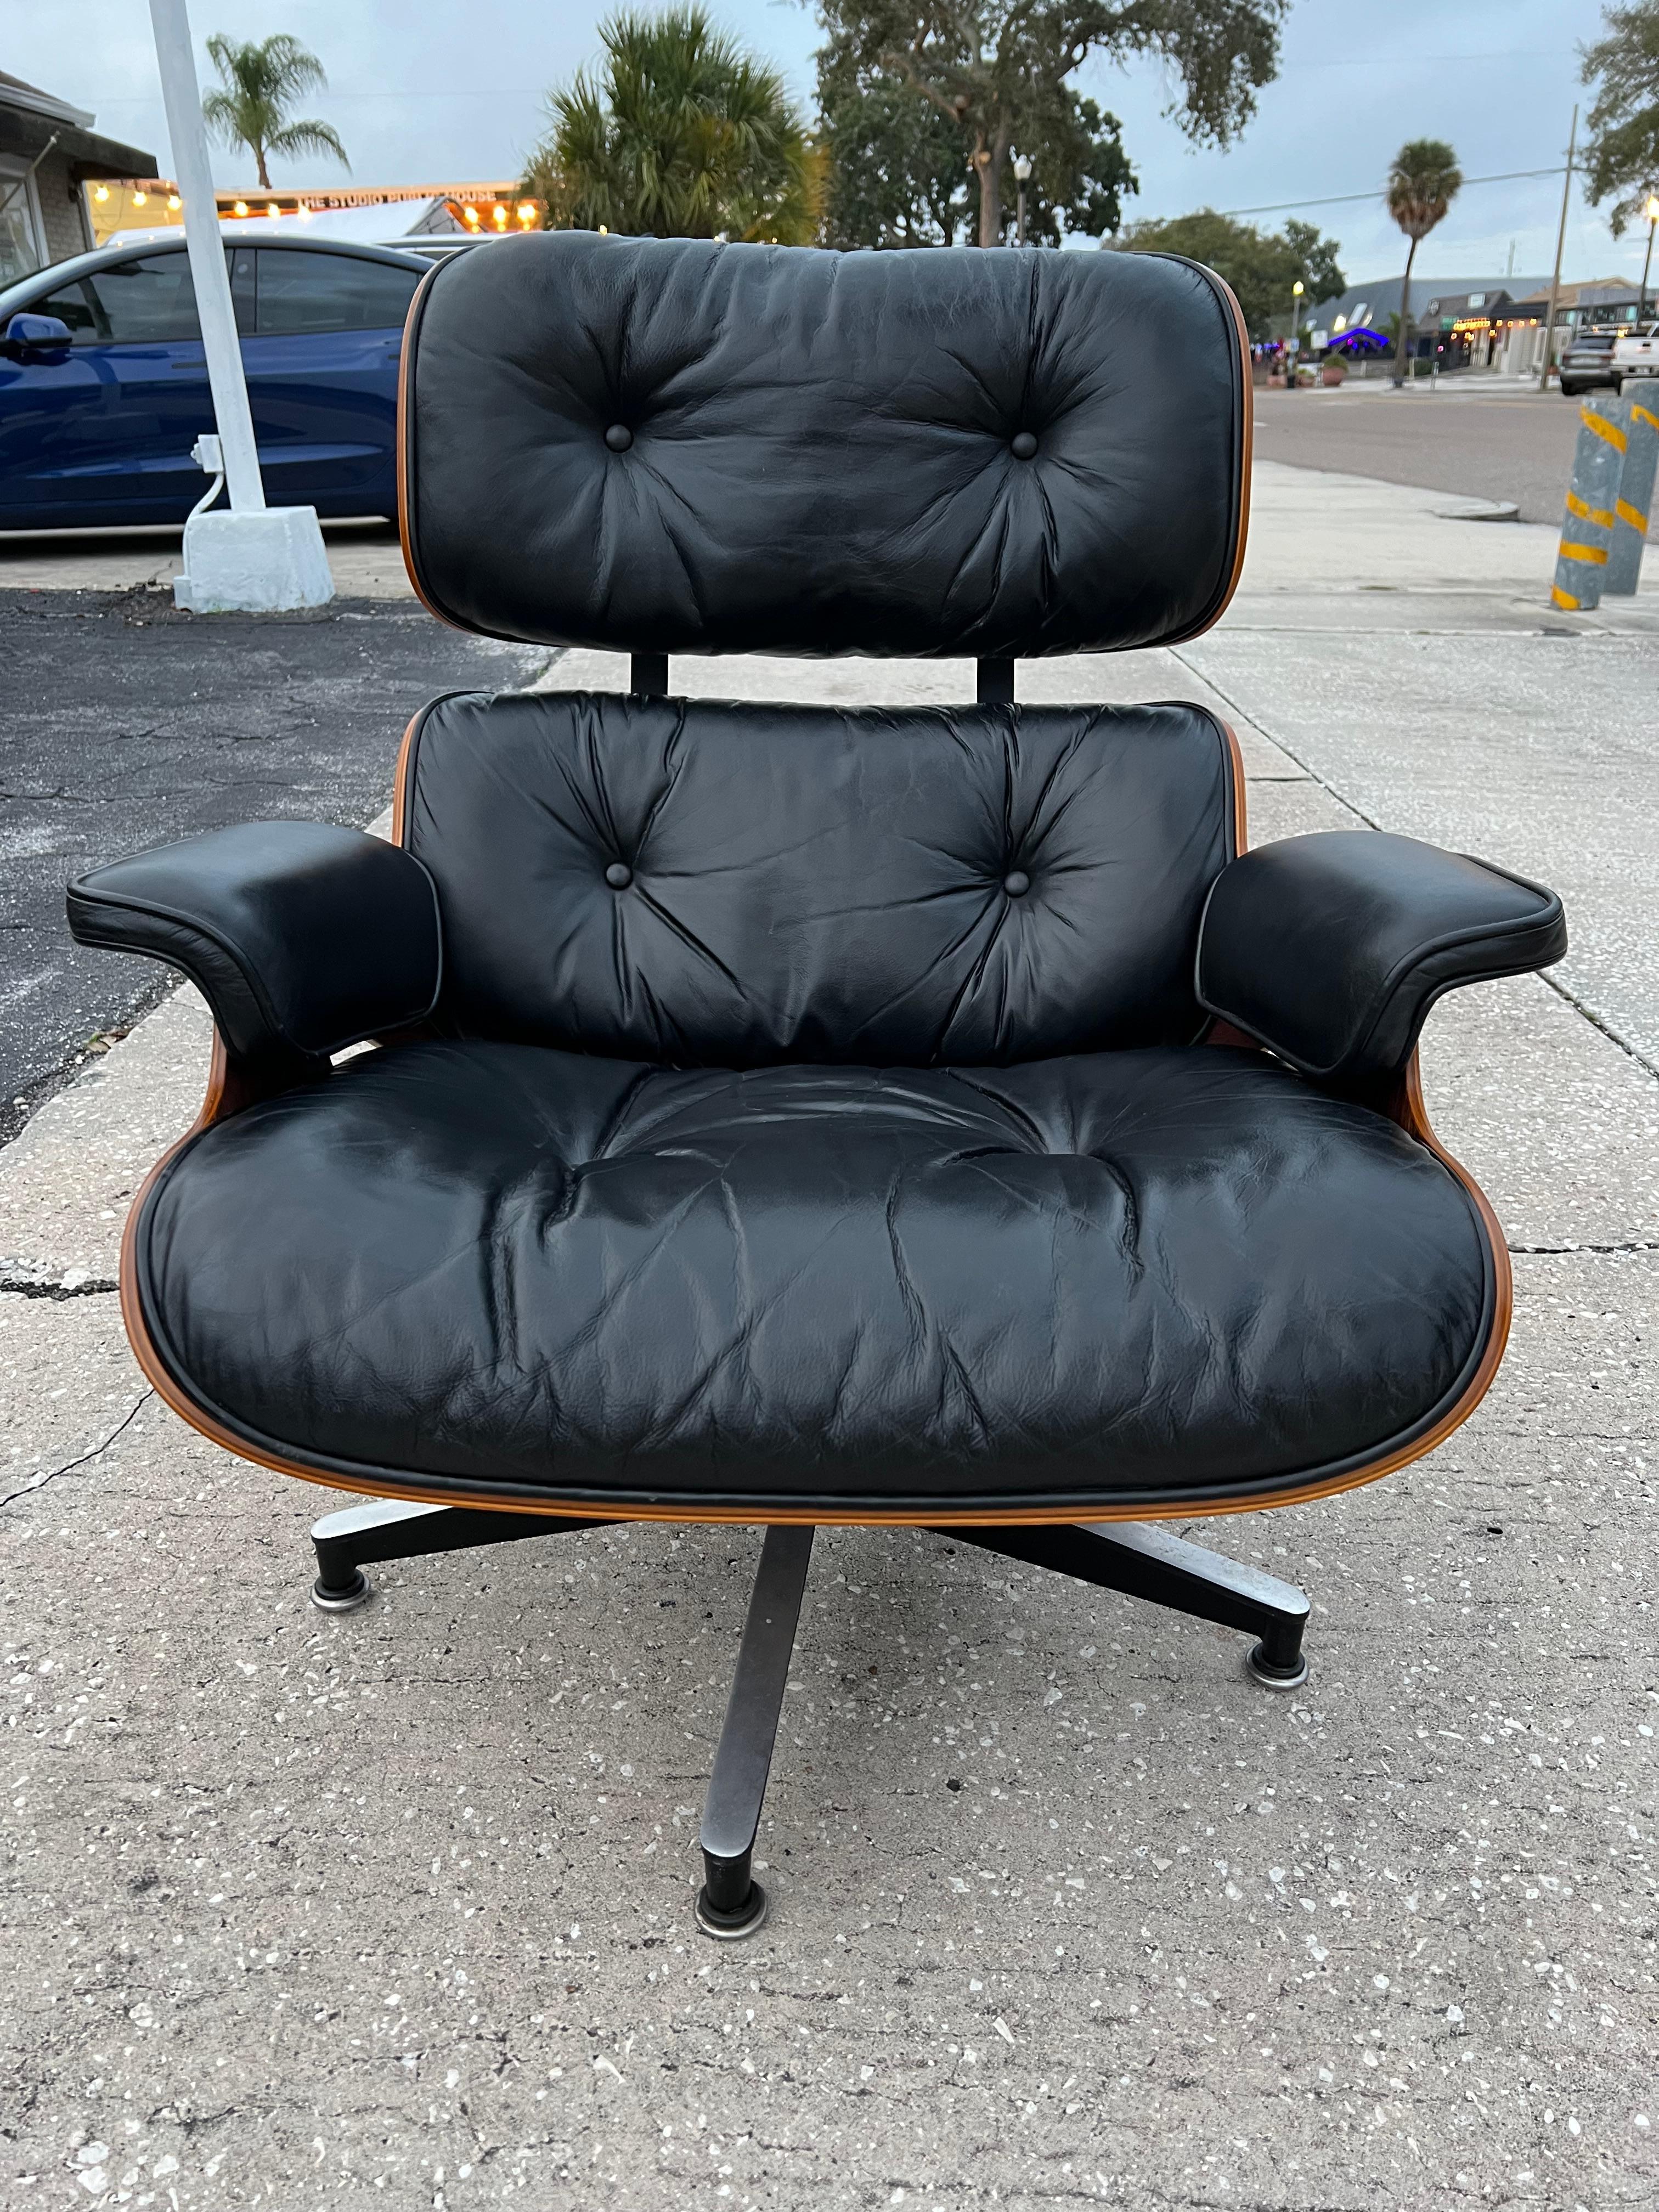 American Classic Charles Eames Herman Miller Lounge Chair Black Leather